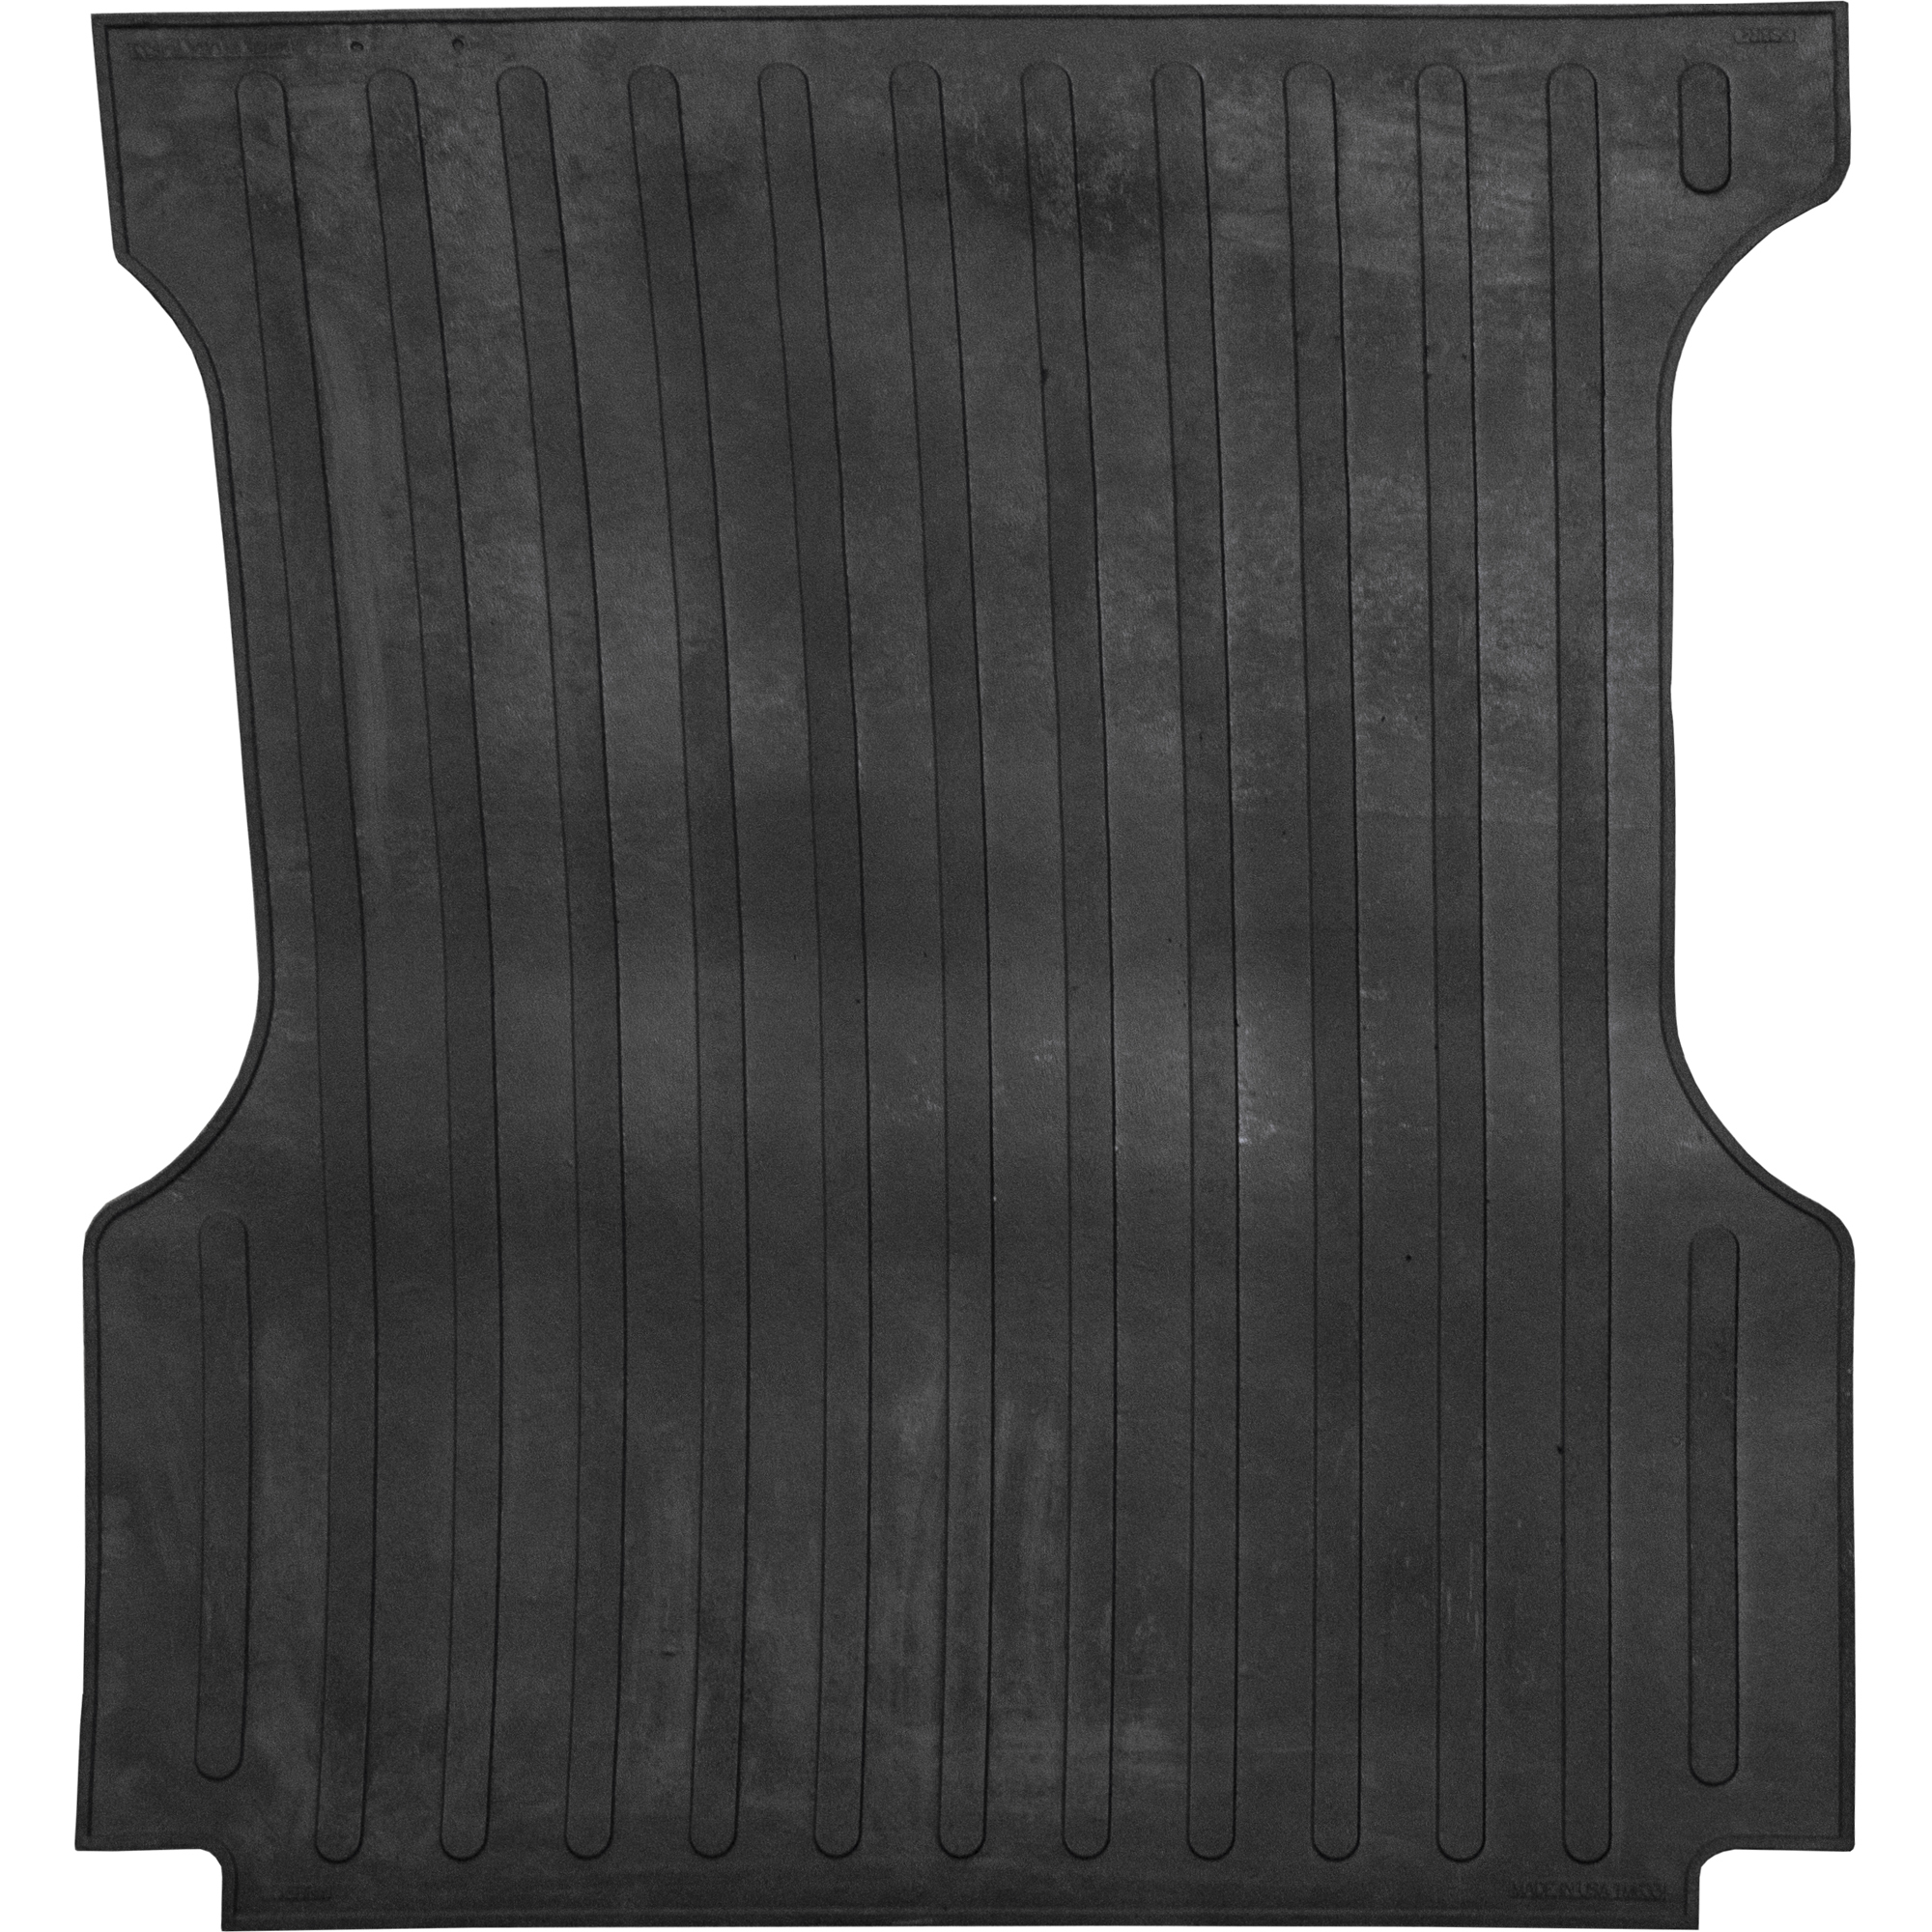 Boomerang Rubber, Chevy/GMC/Sierra 1500-3500 Bed Mat, Long Bed, 8ft. Long, Primary Color Black, Model TM588BAGGED